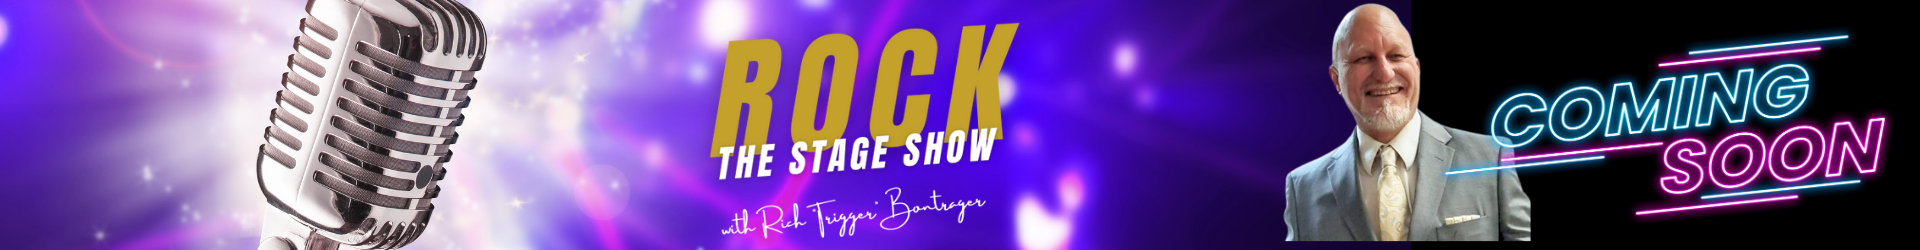 Rock the Stage Media Coming Soon Banner